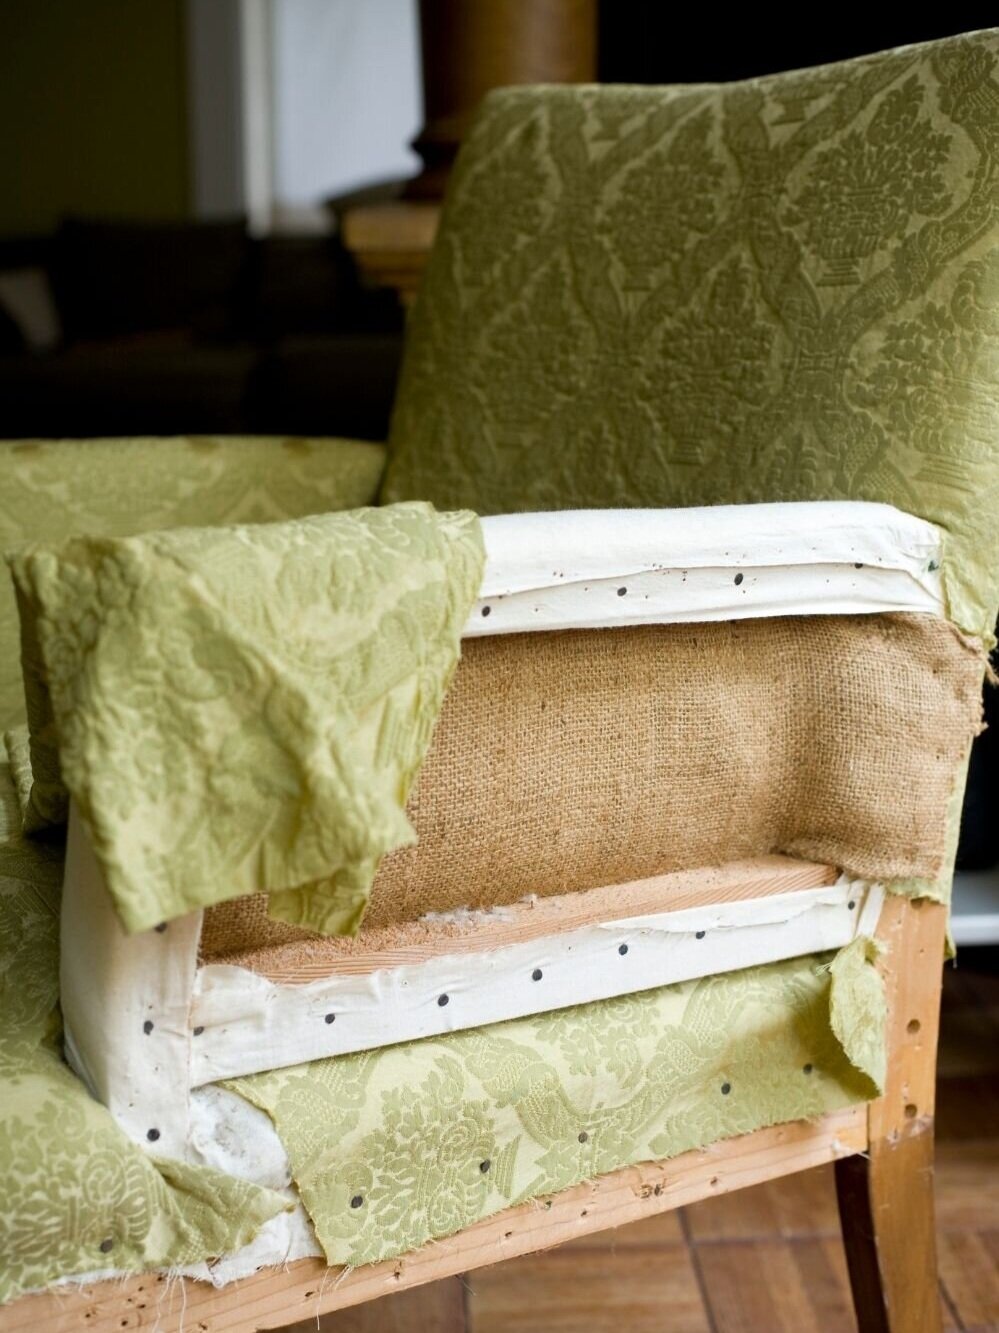 Should Foam Be Replaced When Reupholstering A Piece of Furniture?